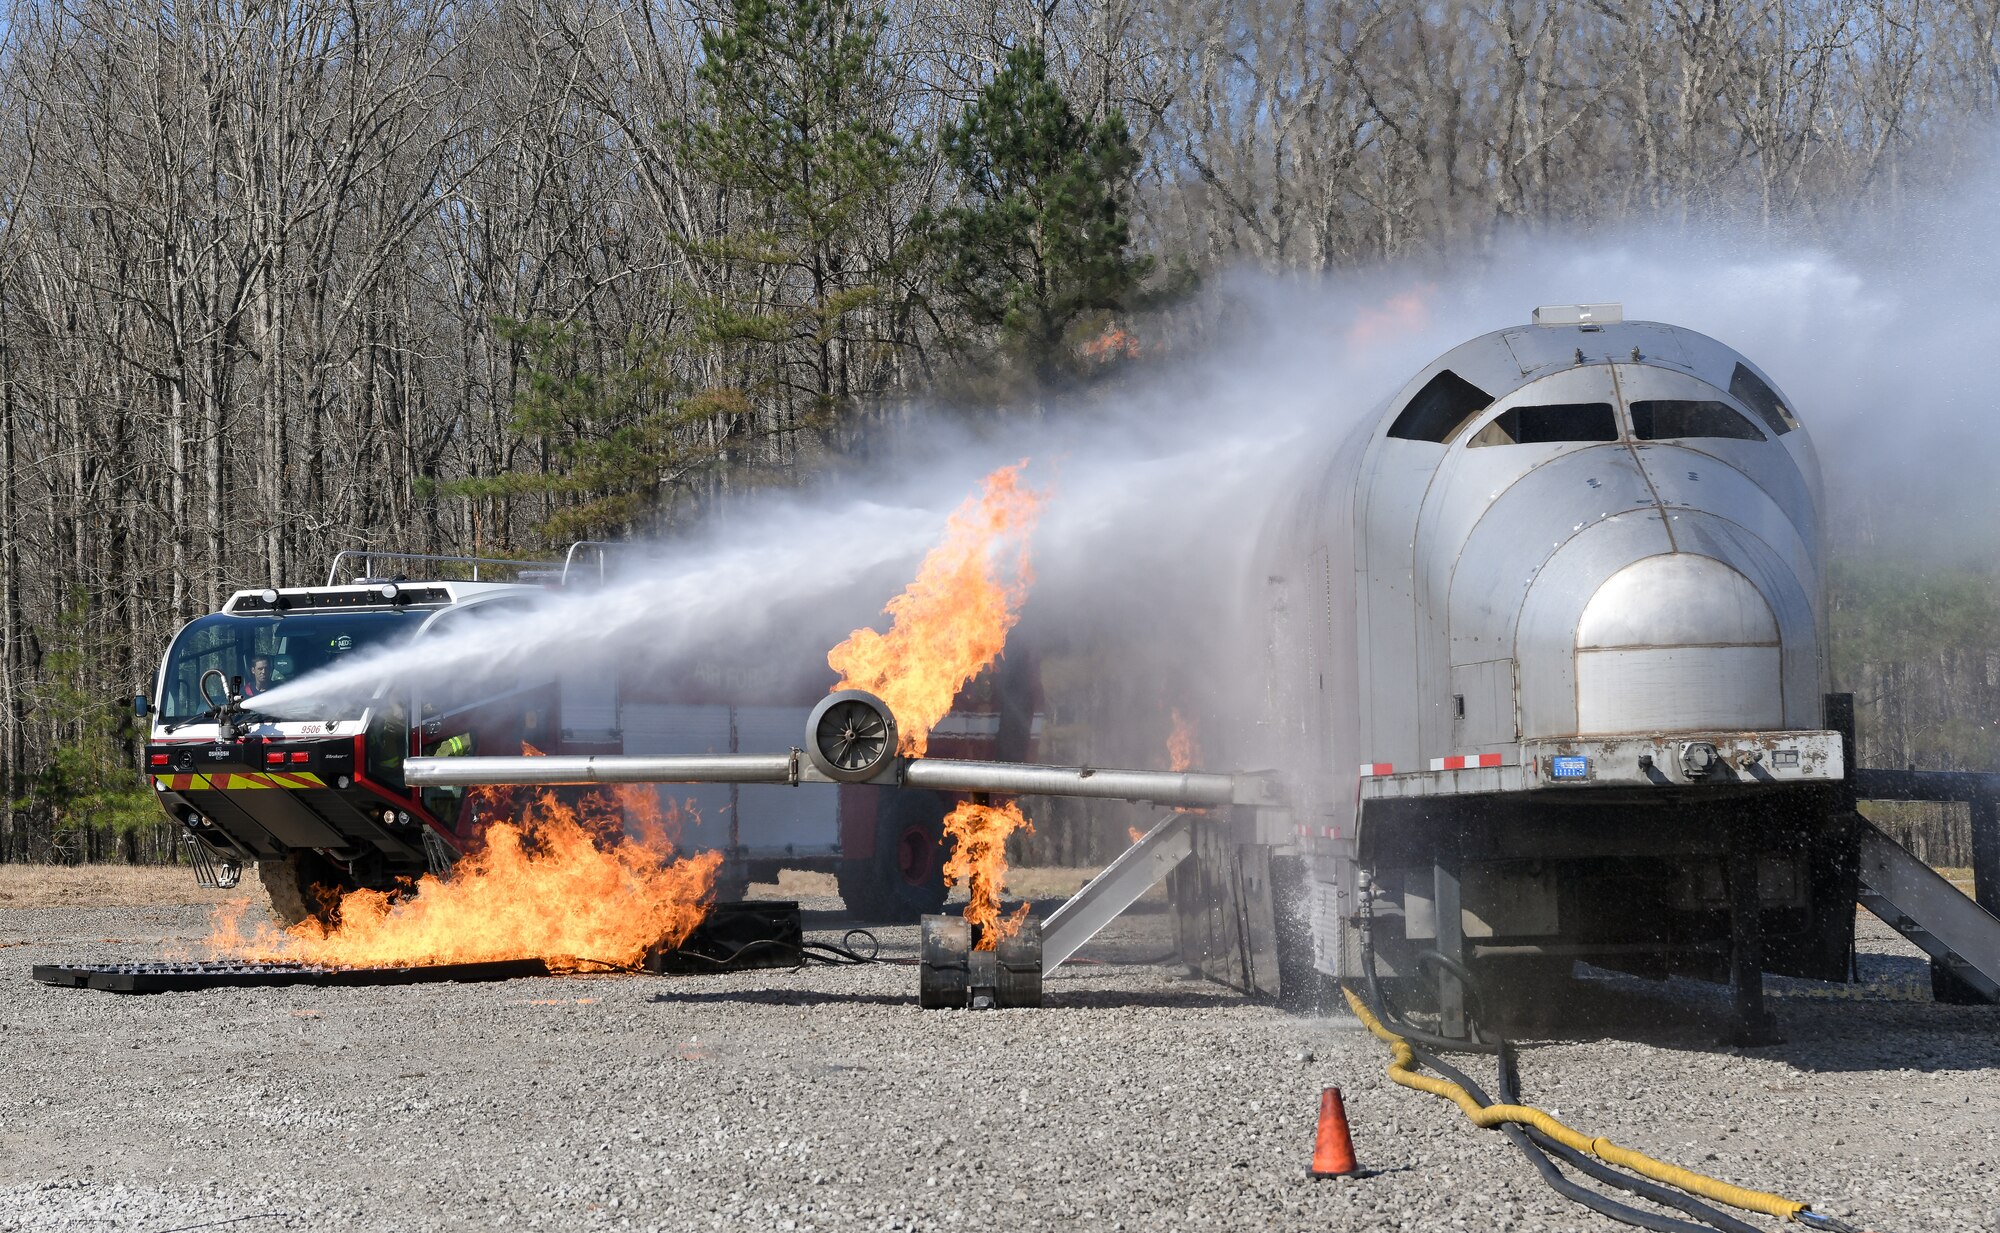 Water being sprayed from bumper turret onto aircraft fire simulator